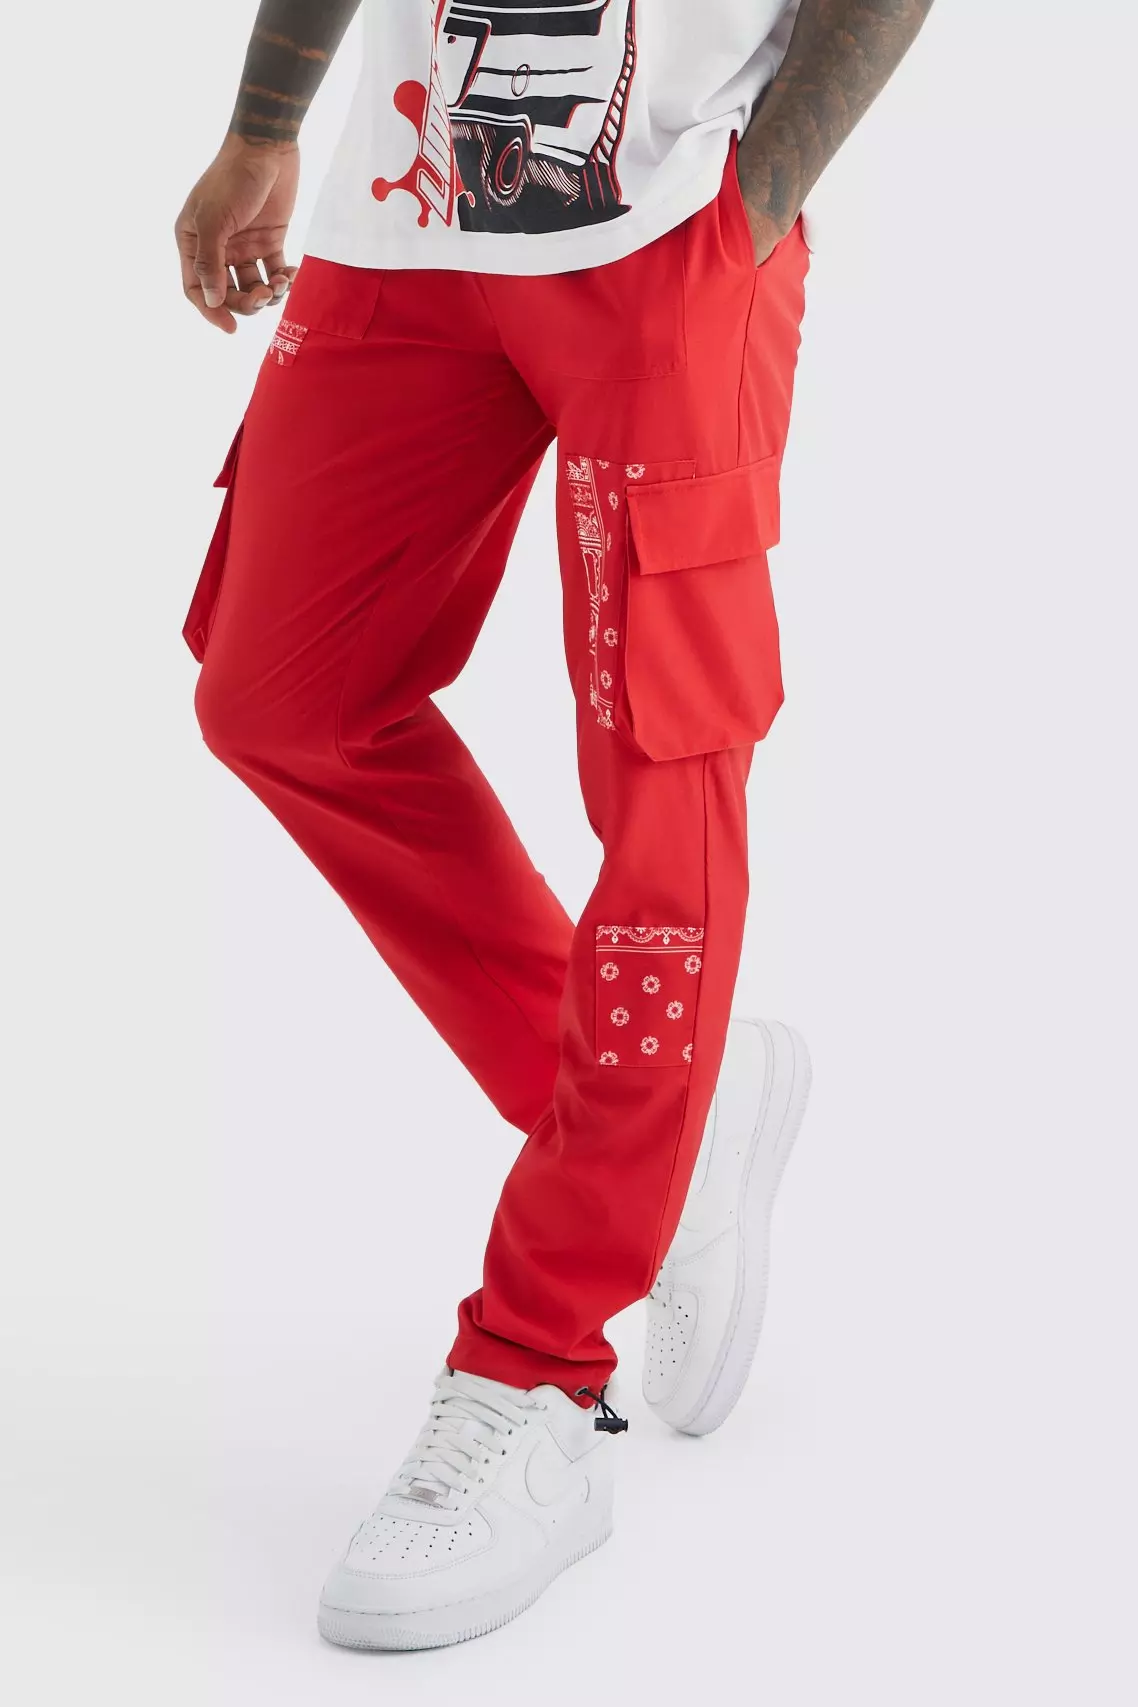 Slim Patched Bandana Multi Cargo Pants Red